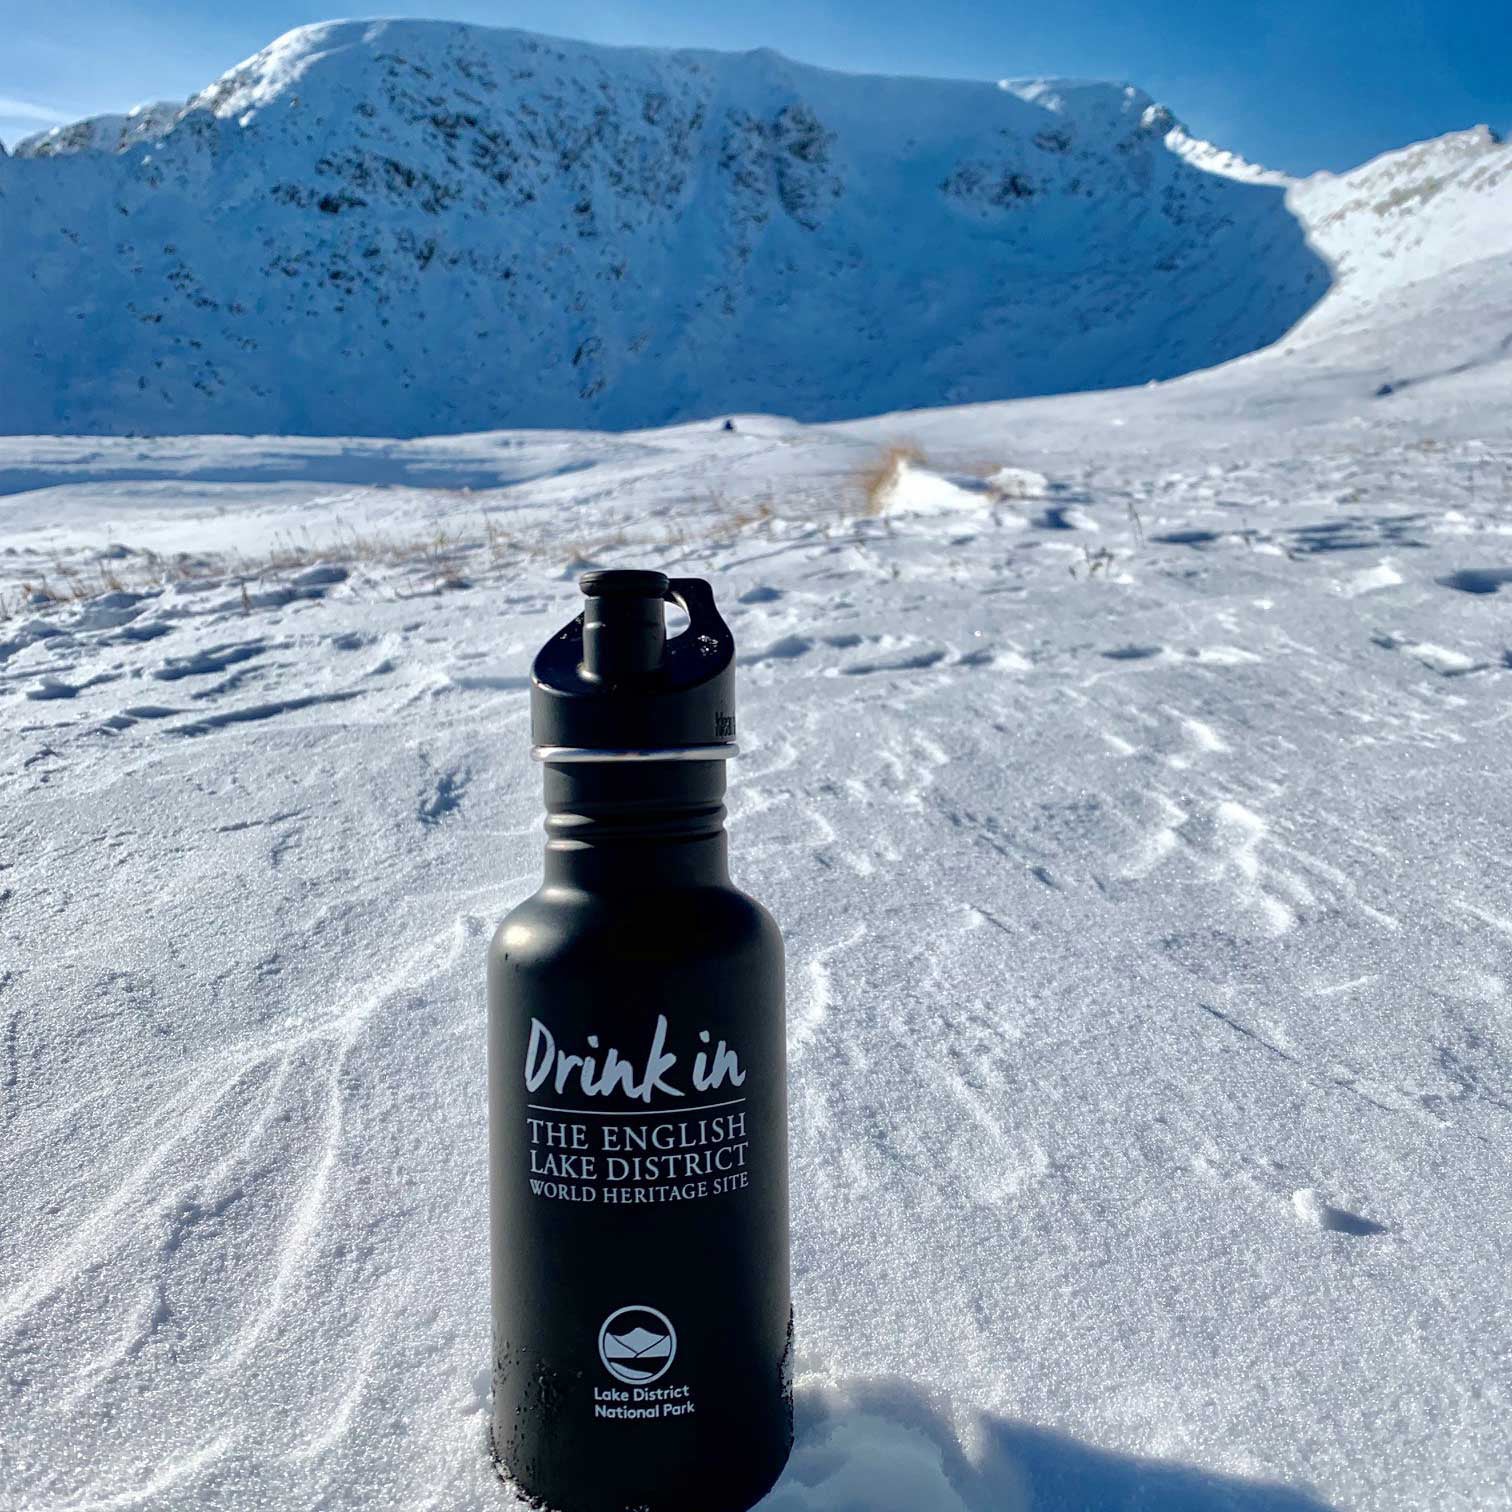 One black water bottle at the base of Helvellyn Lake Distric